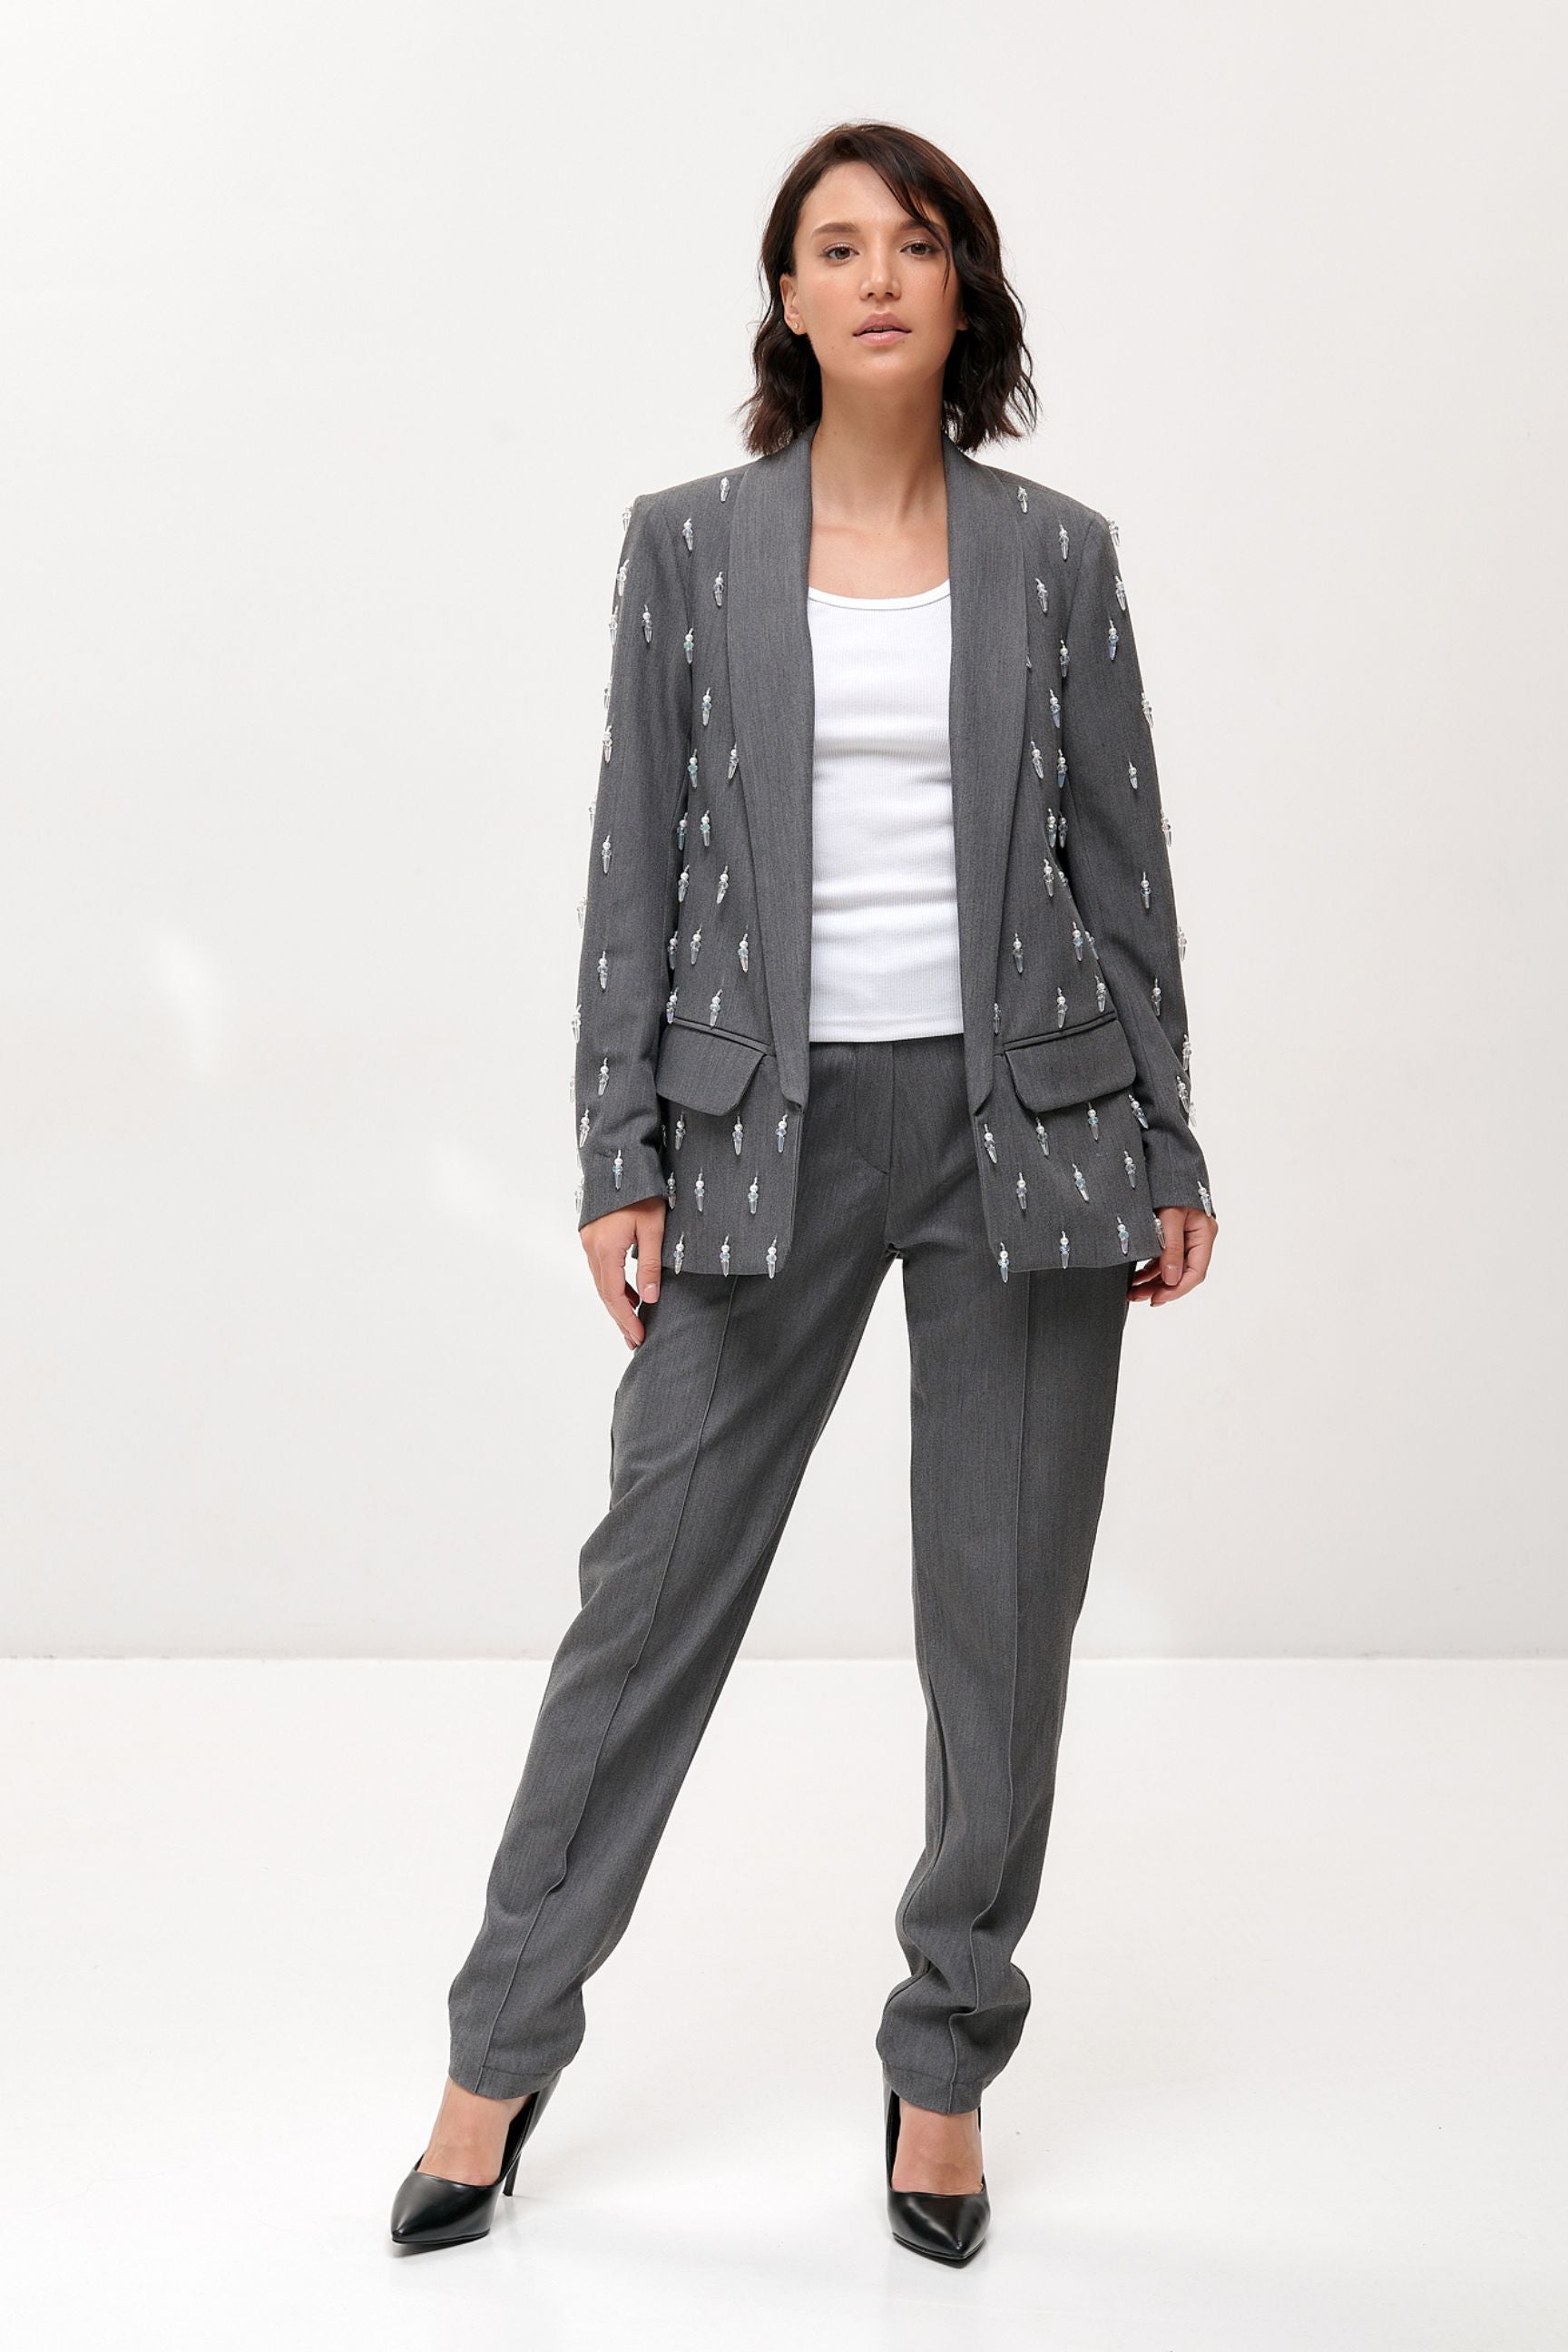 Open Front Blazer & Trousers Suit, Classic Suit for Women, Business Suit with Swarovski Pearls and Crystal Beads